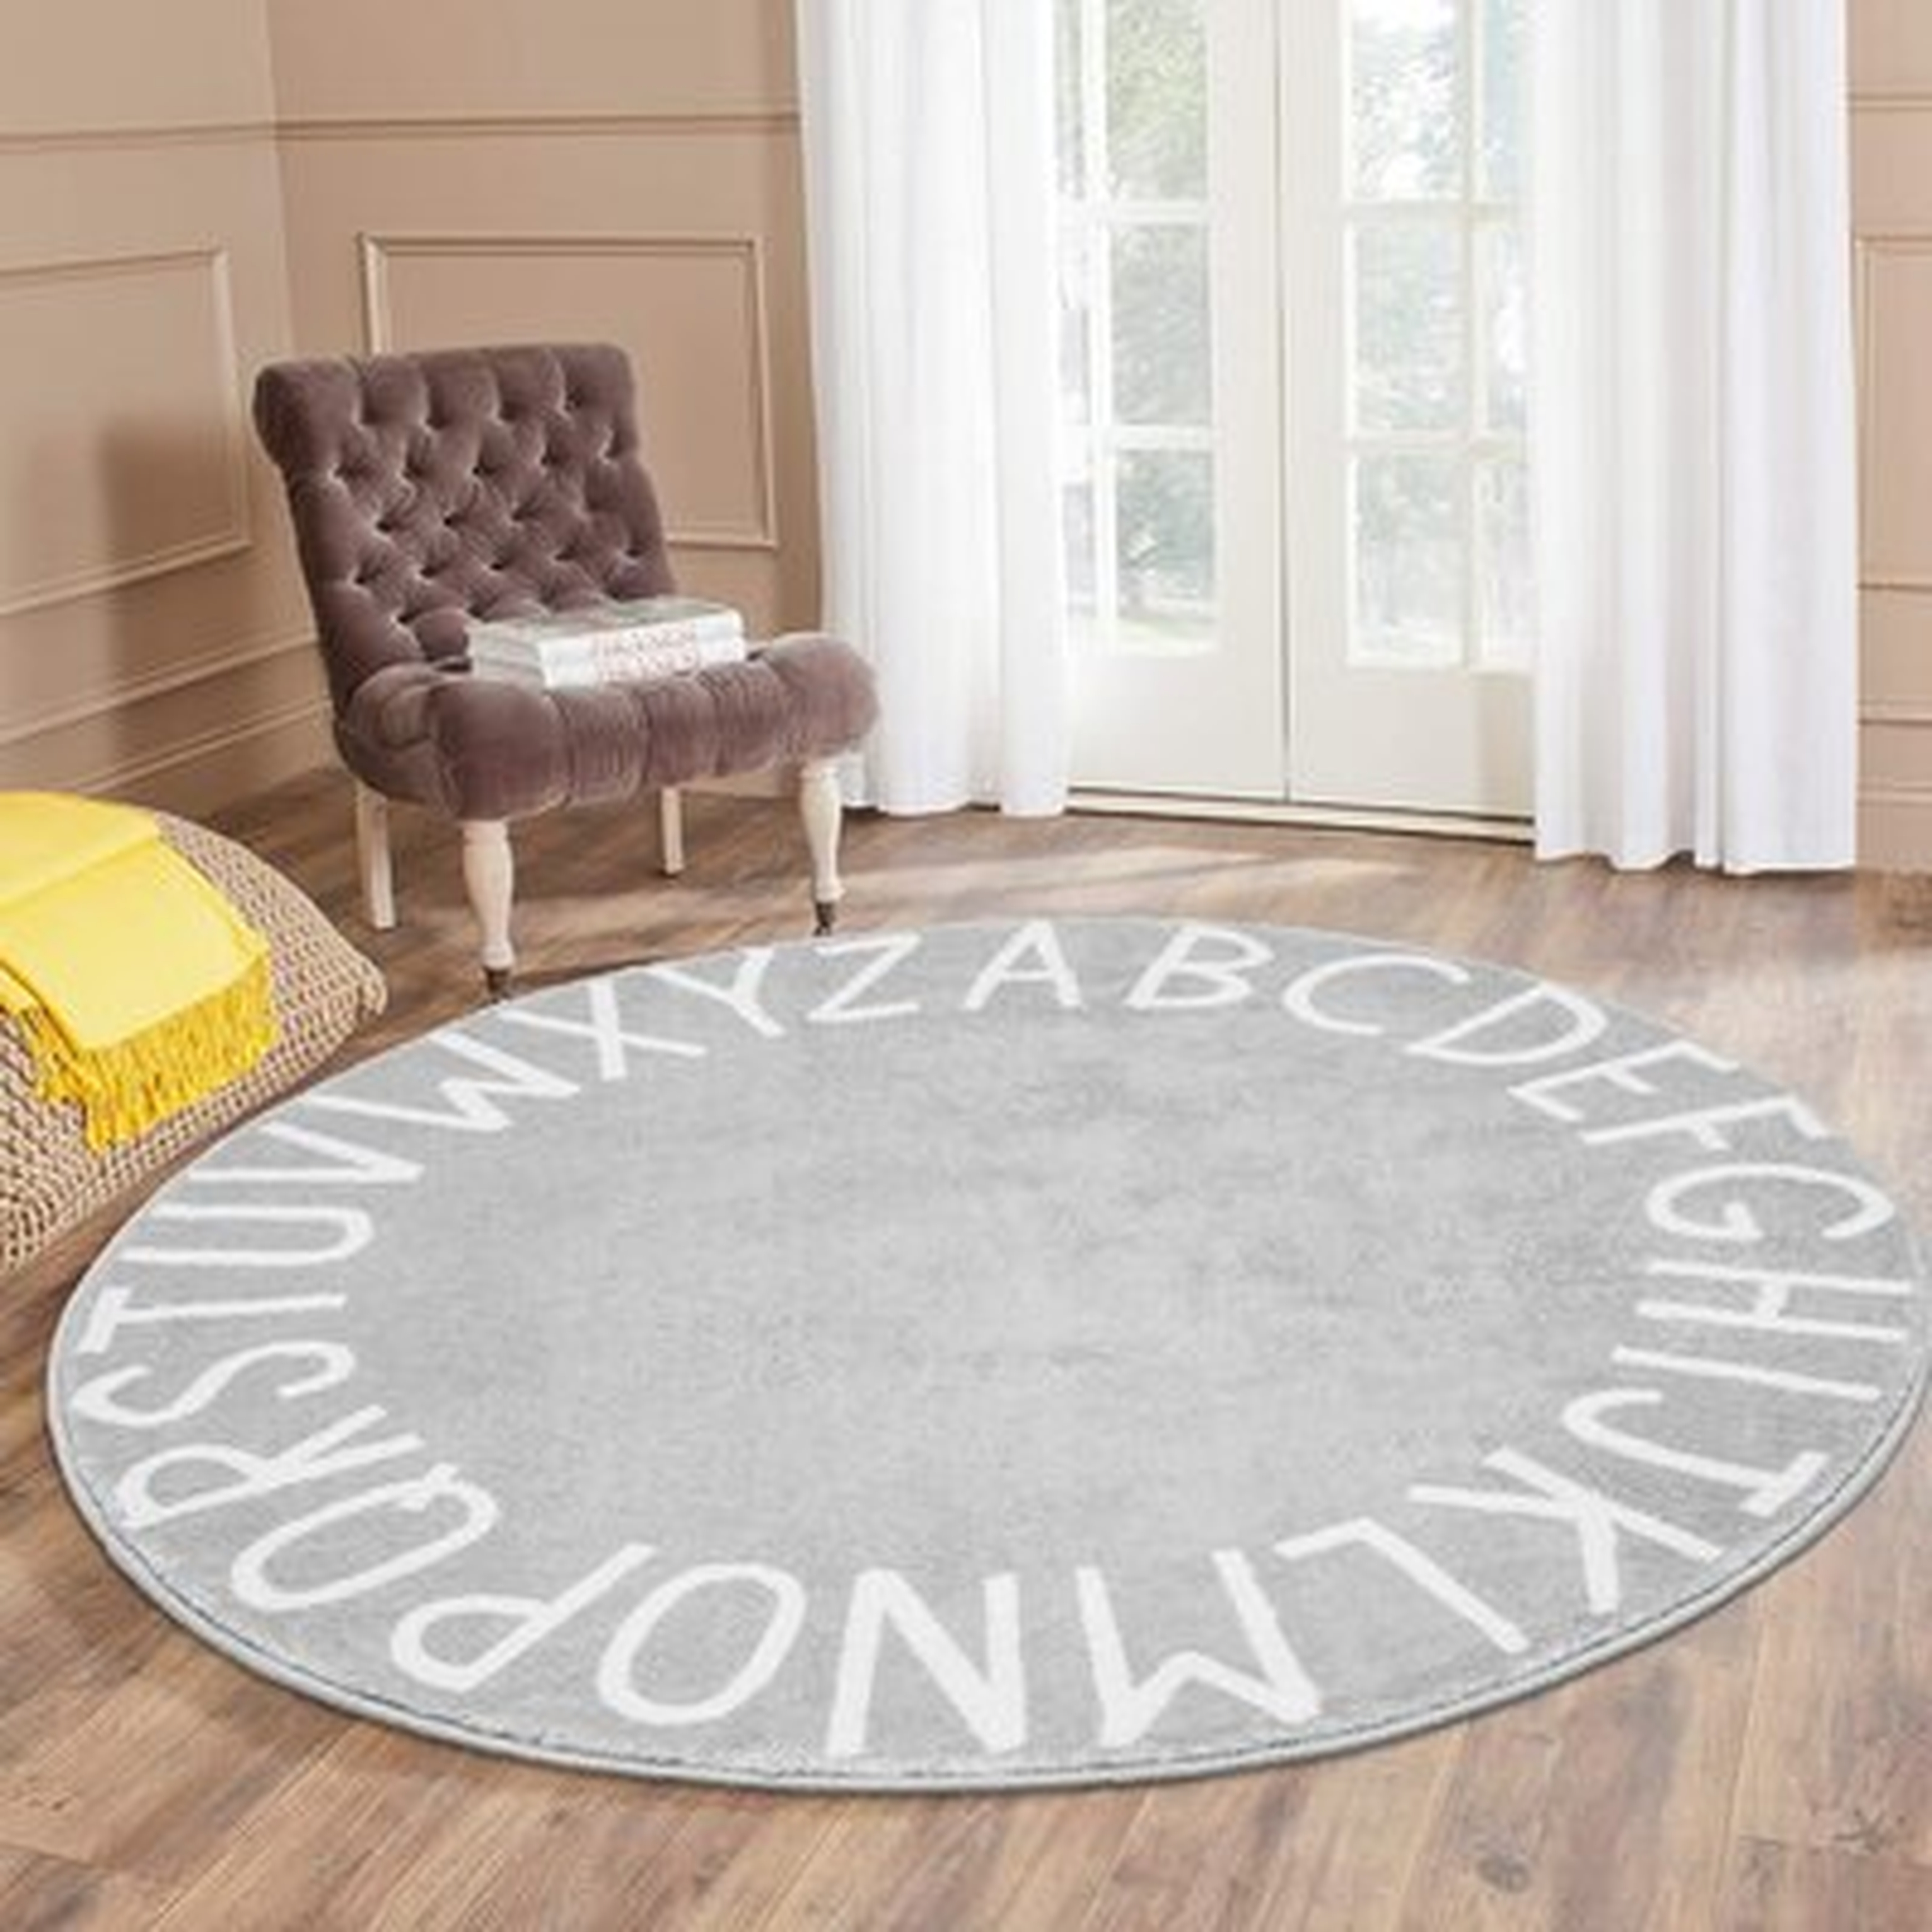 Round Kids Play Rug Alphabet Nursery Area Rug Extra Large Soft Crawling Play Mat For Children Toddlers - Wayfair